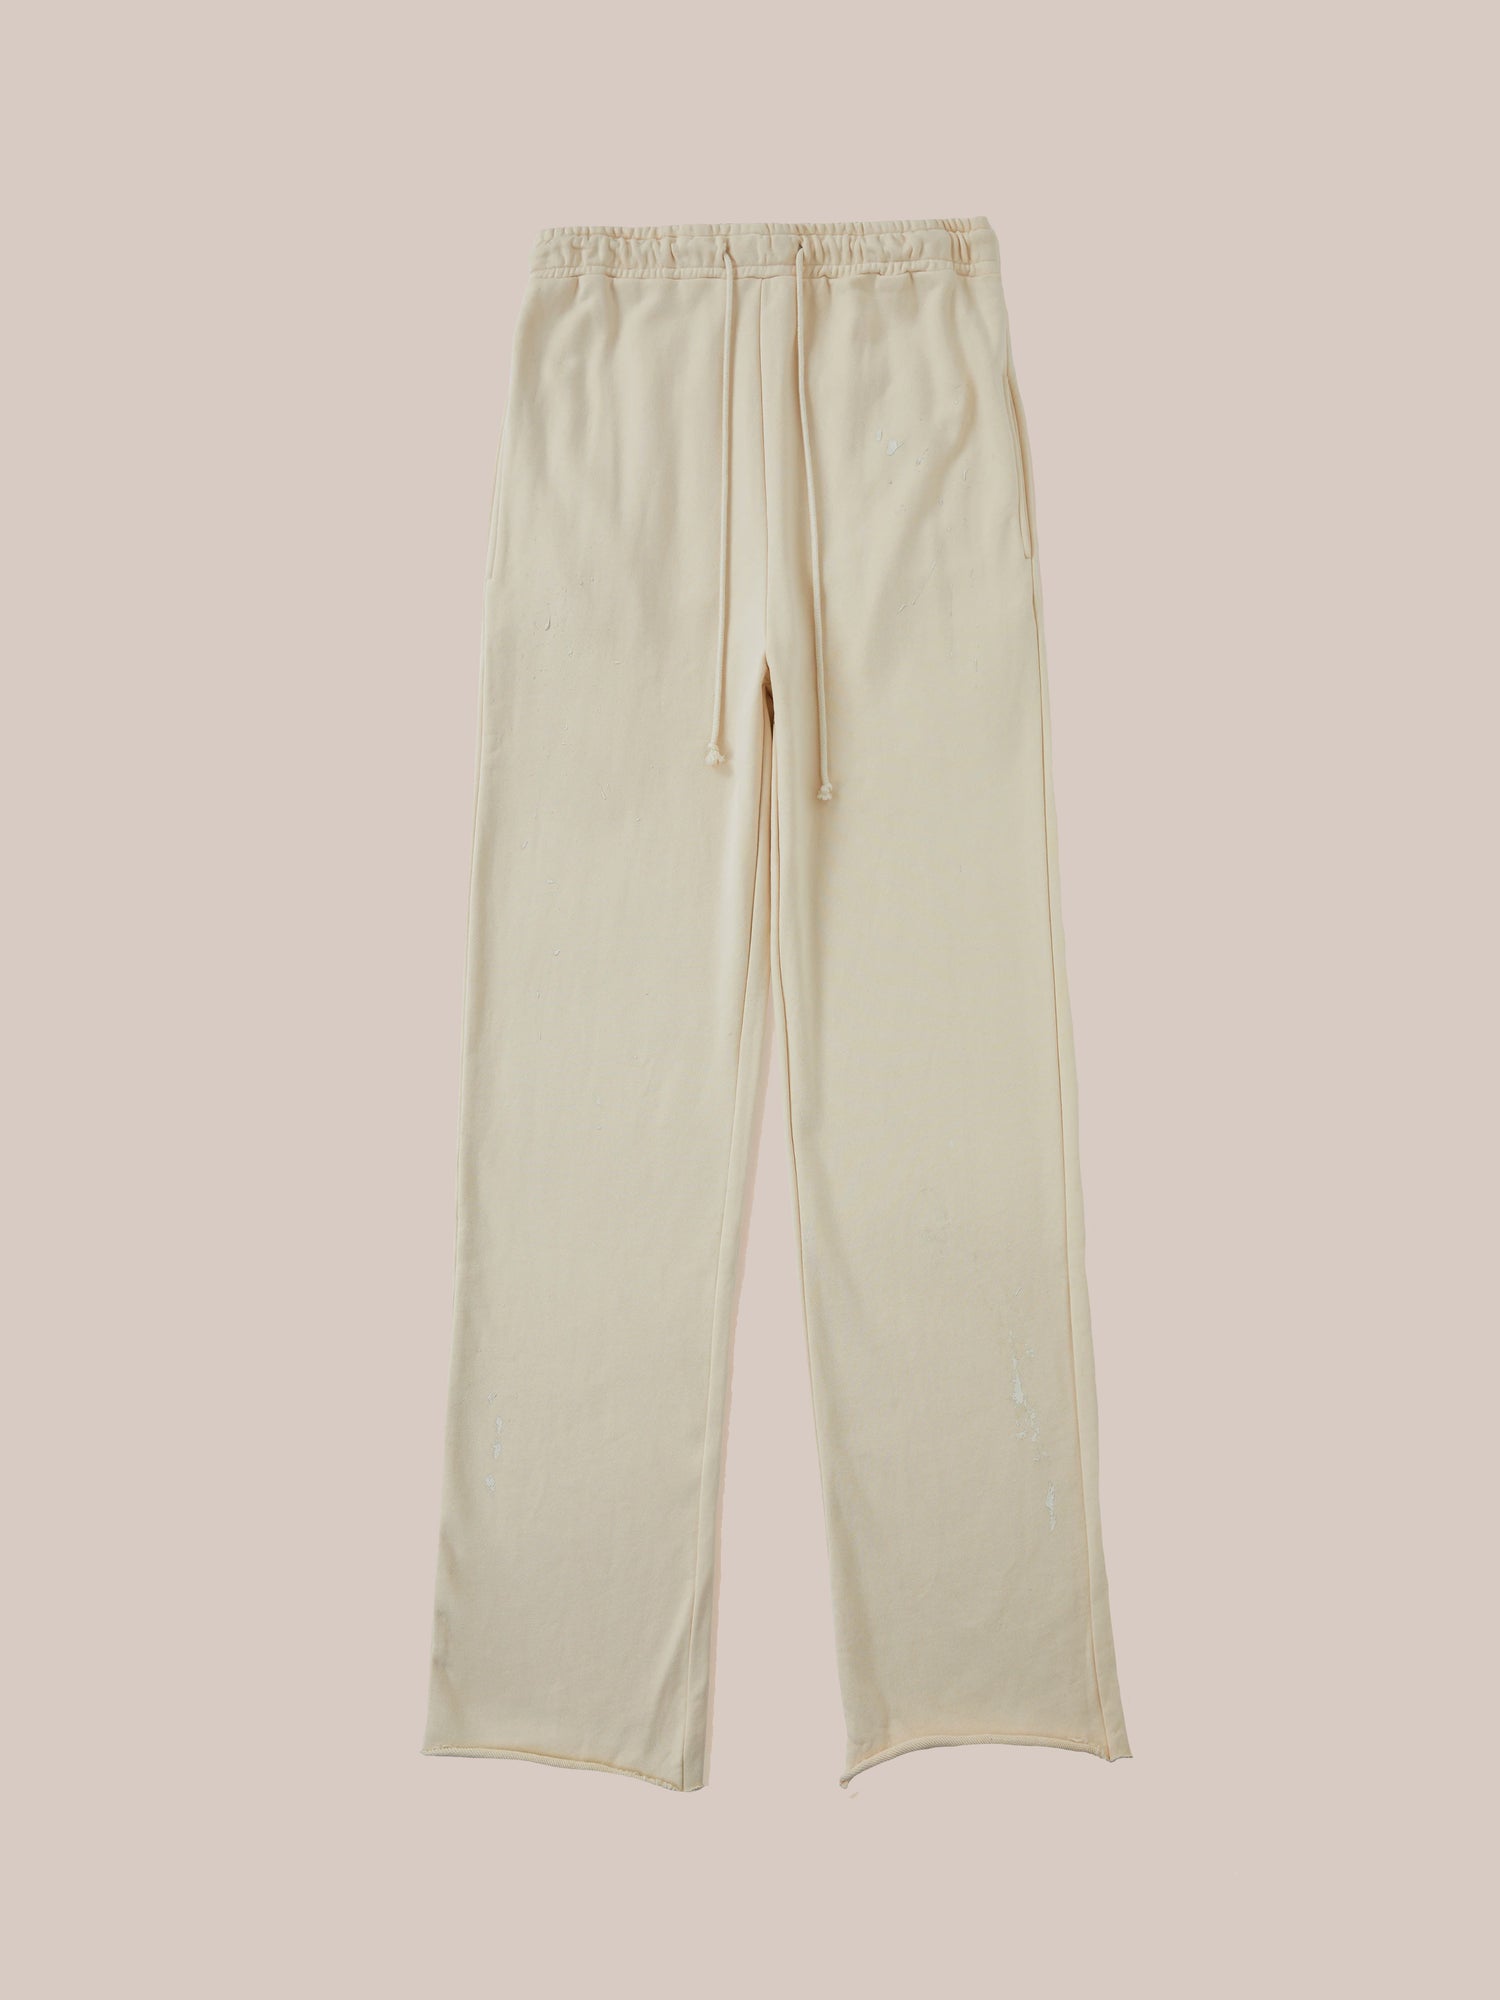 A pair of Found Sandshell Lounge Pants with an elastic waistband, displayed flat against a pale pink background.